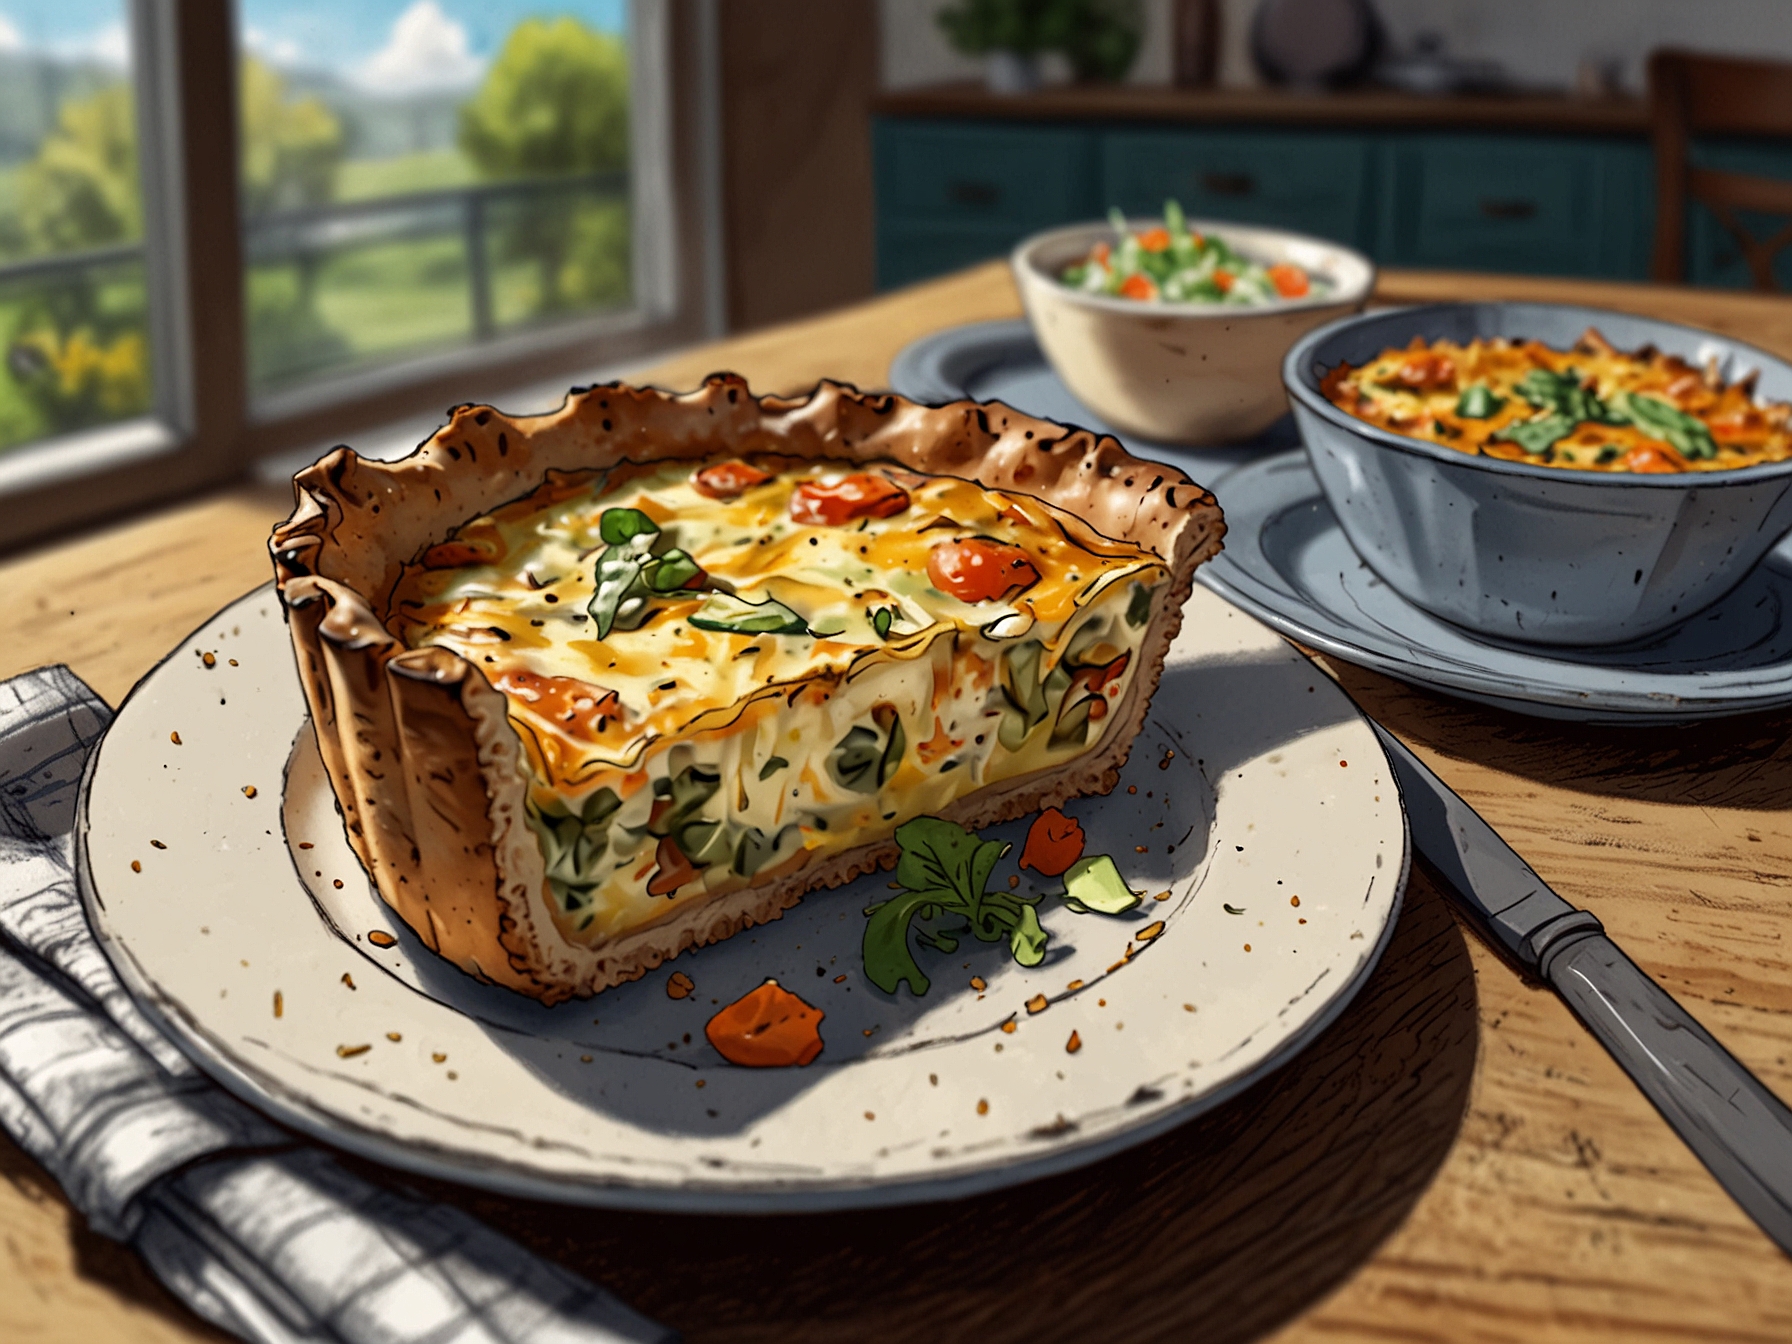 A close-up of sliced pieces of the quiche traybake served on a plate, showcasing the creamy, rich filling and the crispy, golden crust, with a side salad in the background.